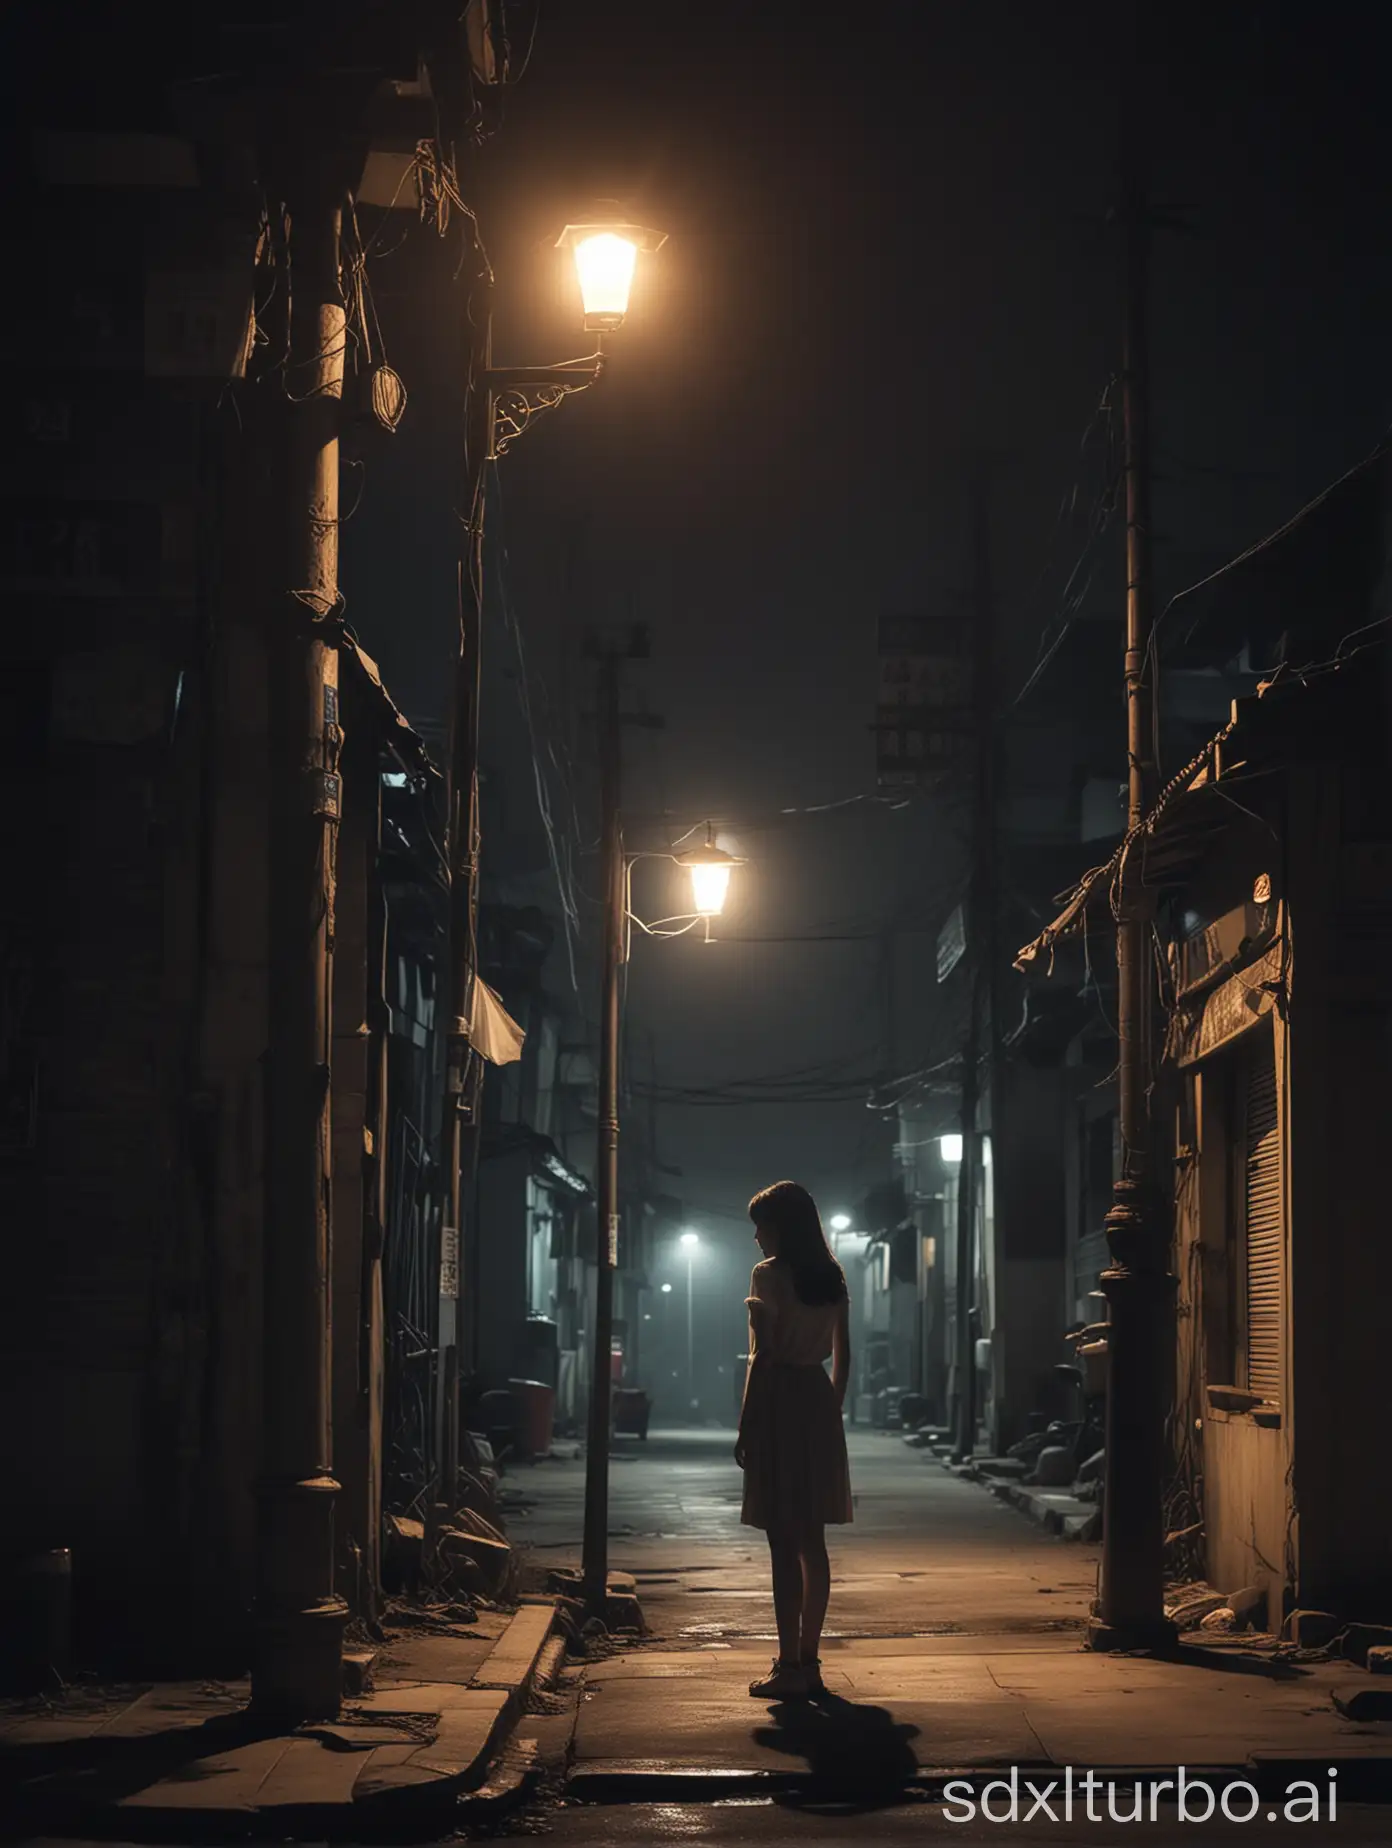 At night, a Chinese girl is standing lonely and sadly under a streetlight's glow